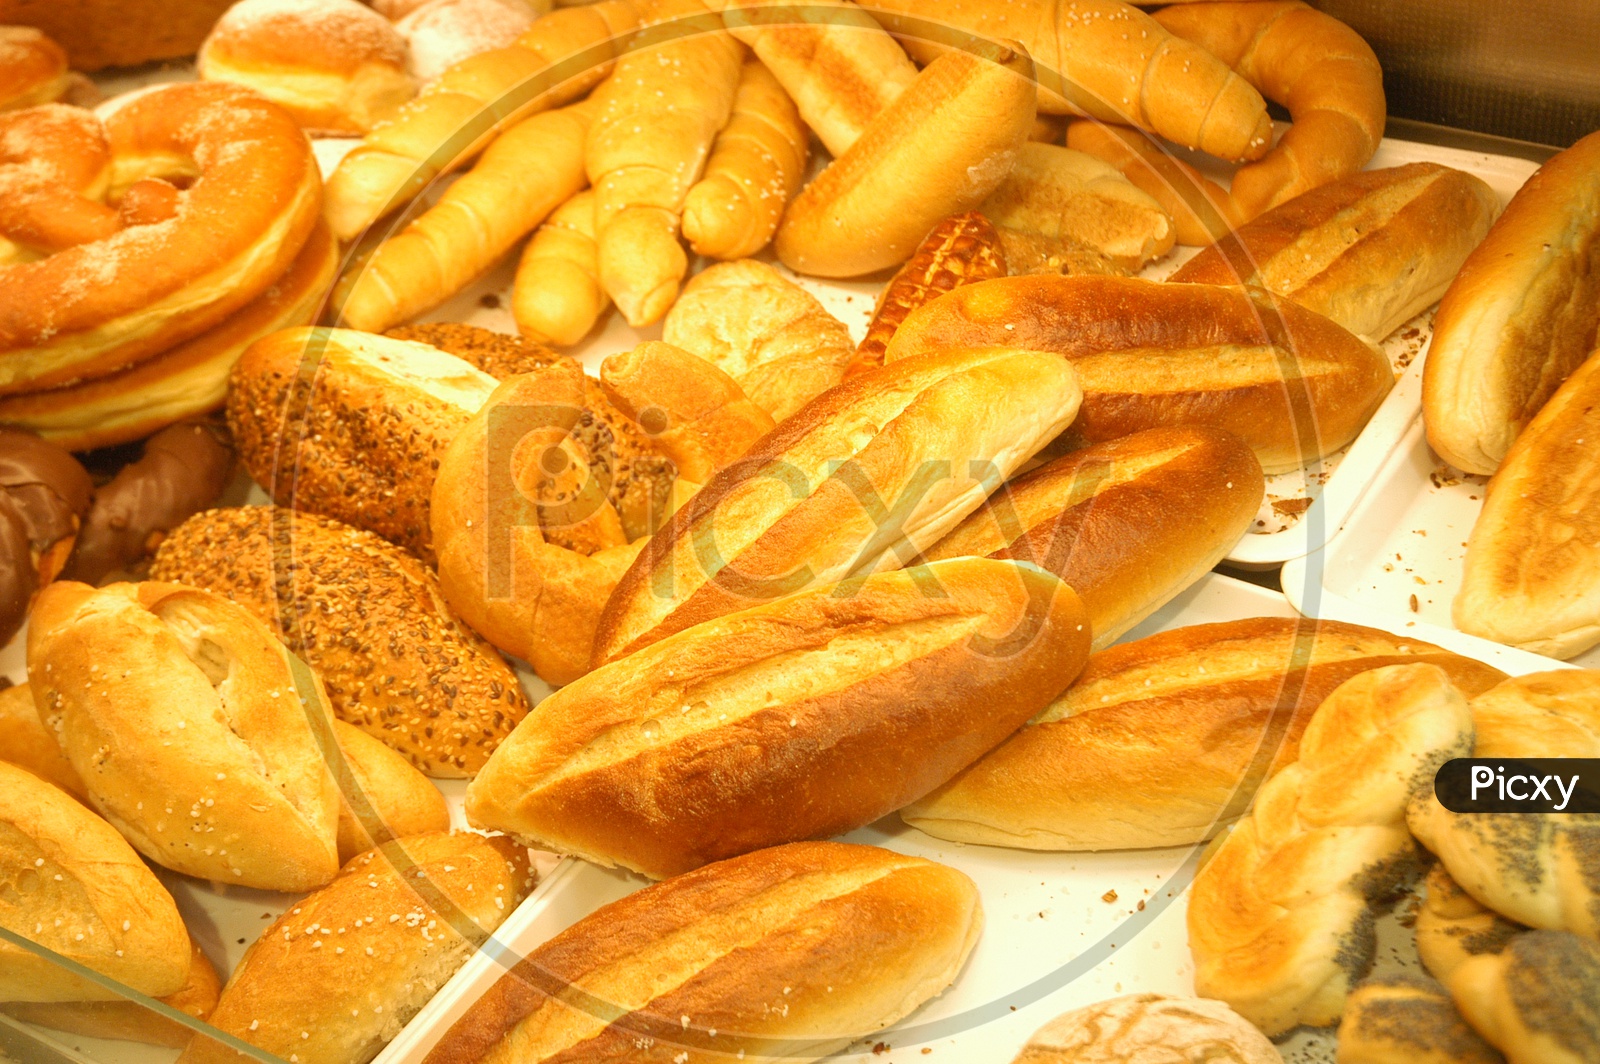 Several types of french breads